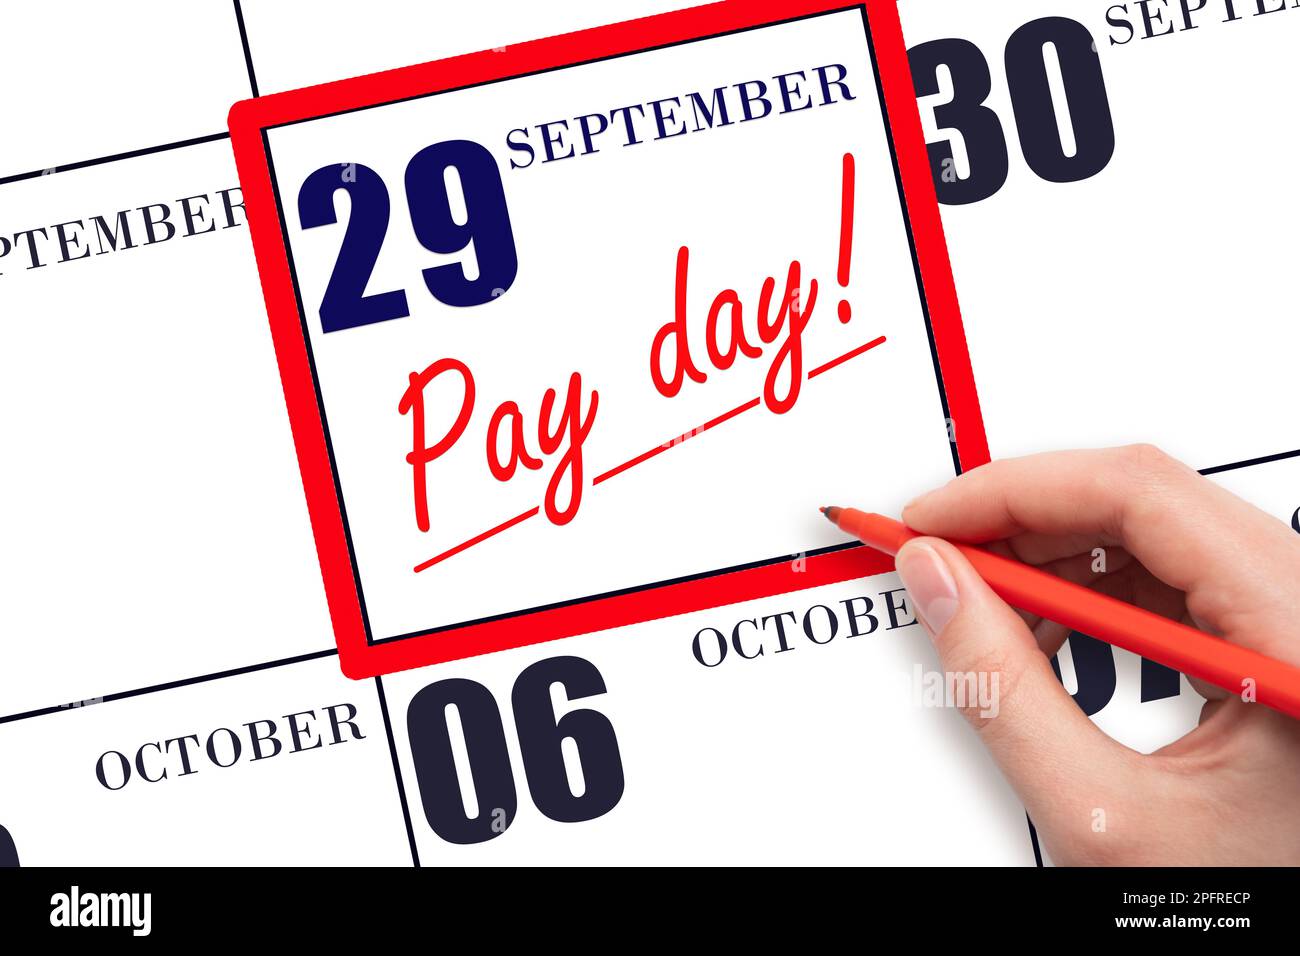 29th day of September. Hand writing text PAY DATE on calendar date September  29 and underline it. Payment due date.  Reminder concept of payment. Aut Stock Photo